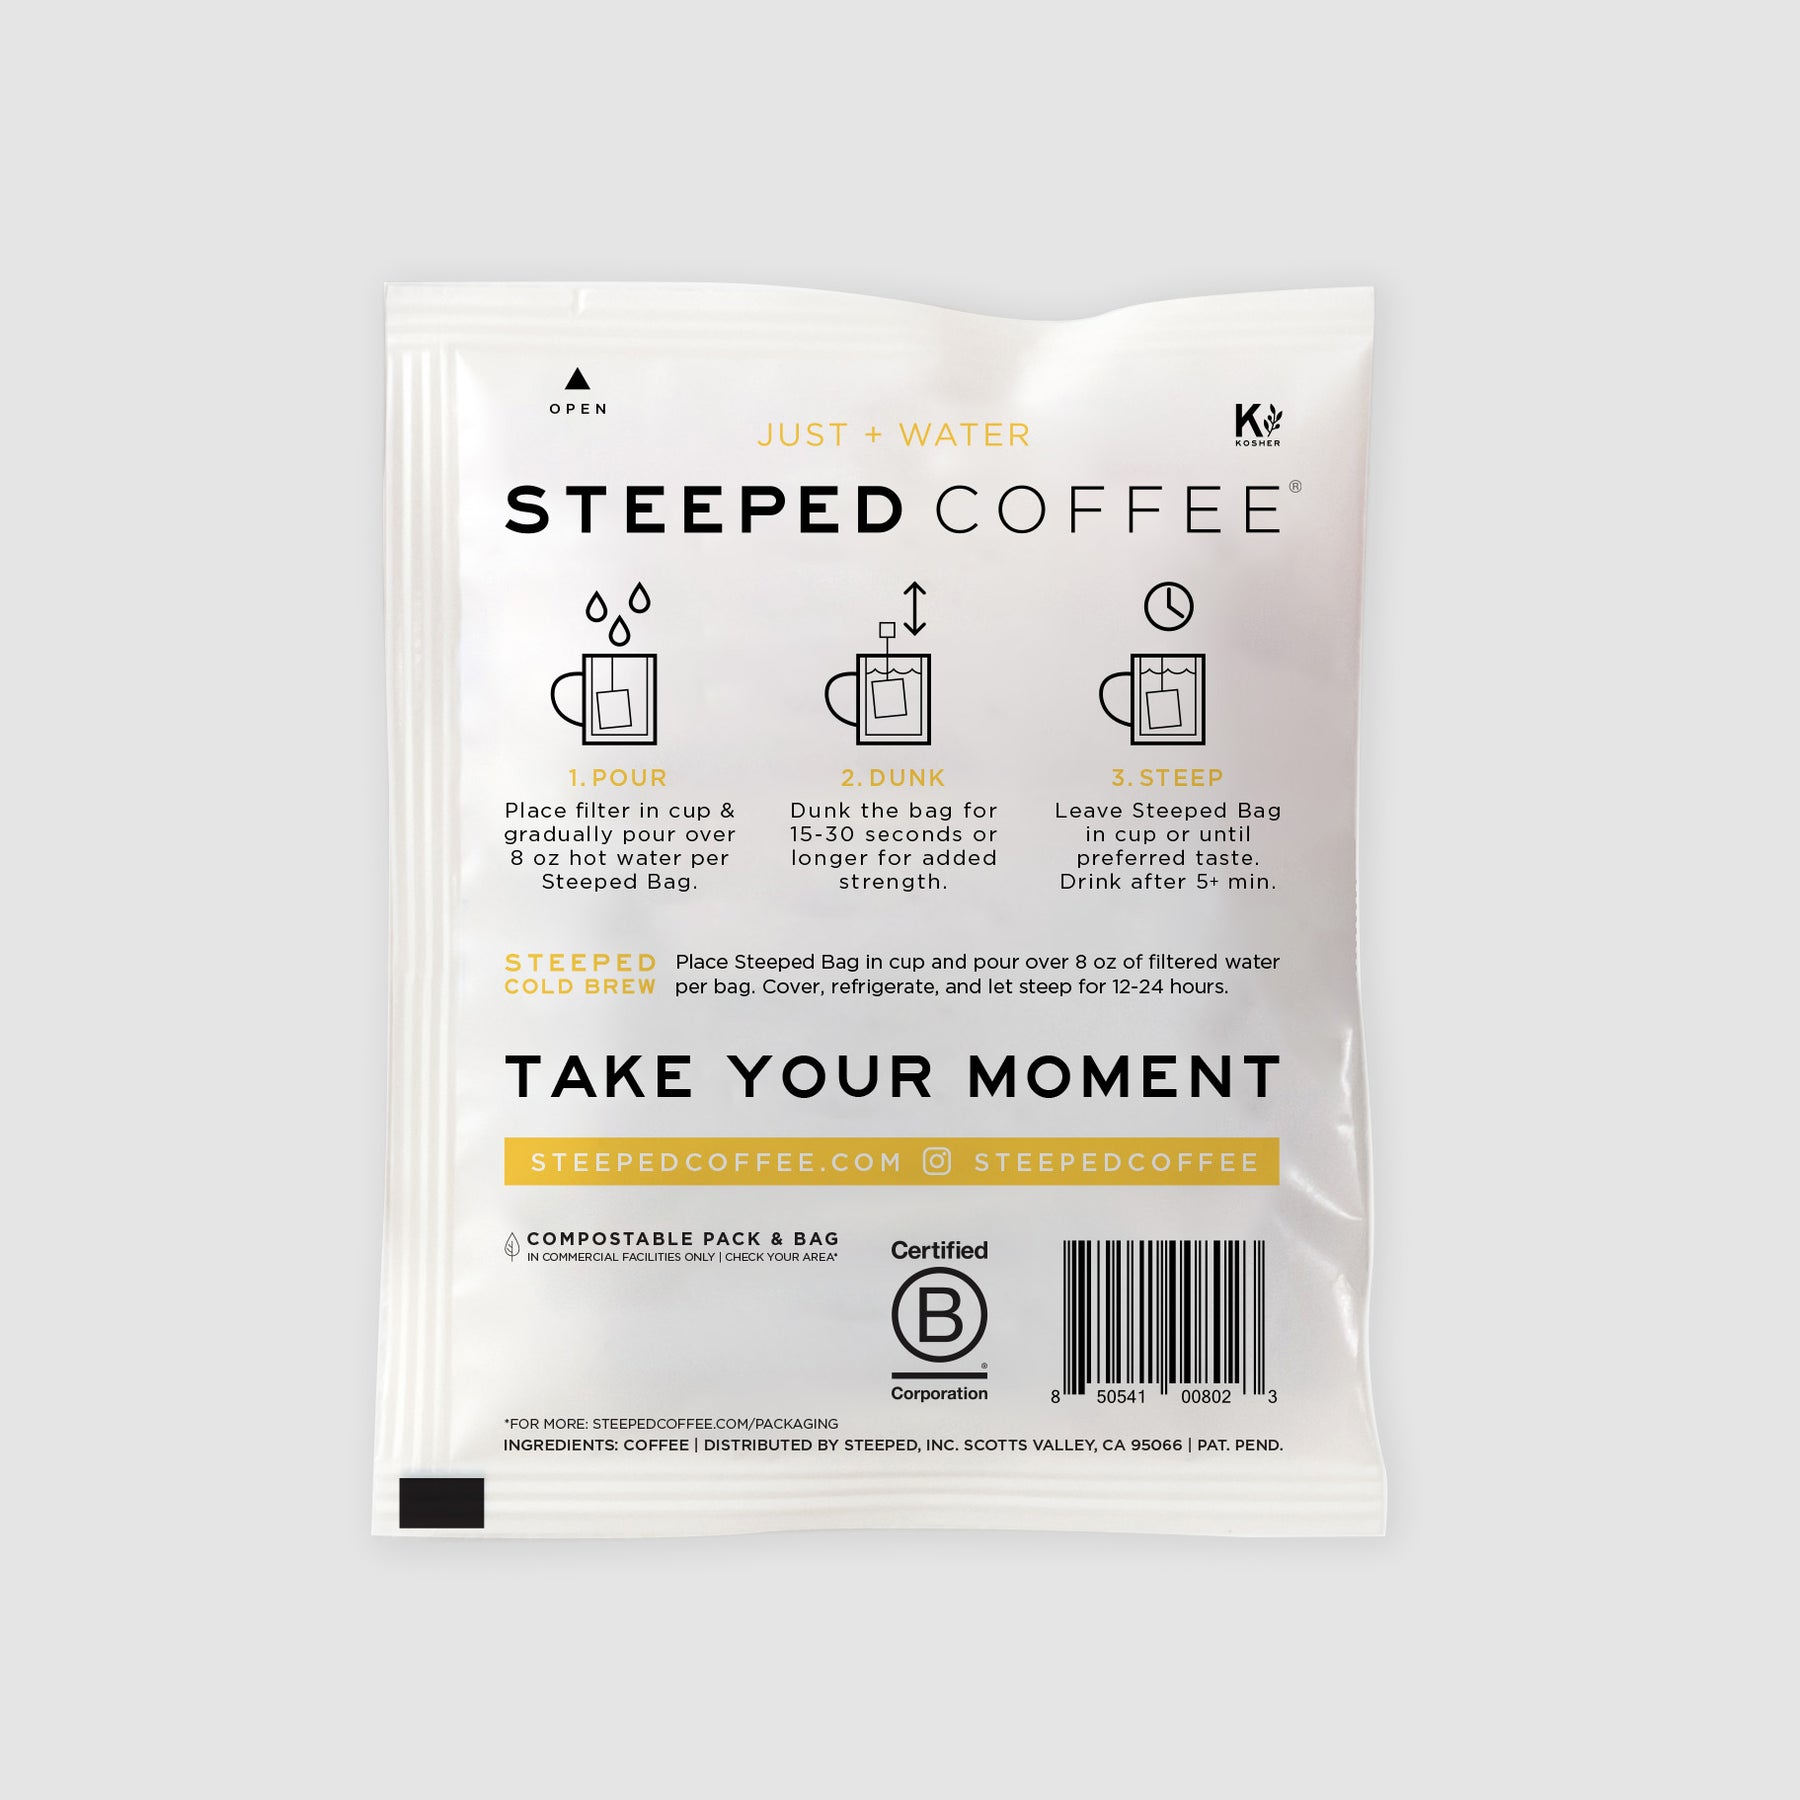 7 Steeped Coffee Options for a Great Cup on the Go